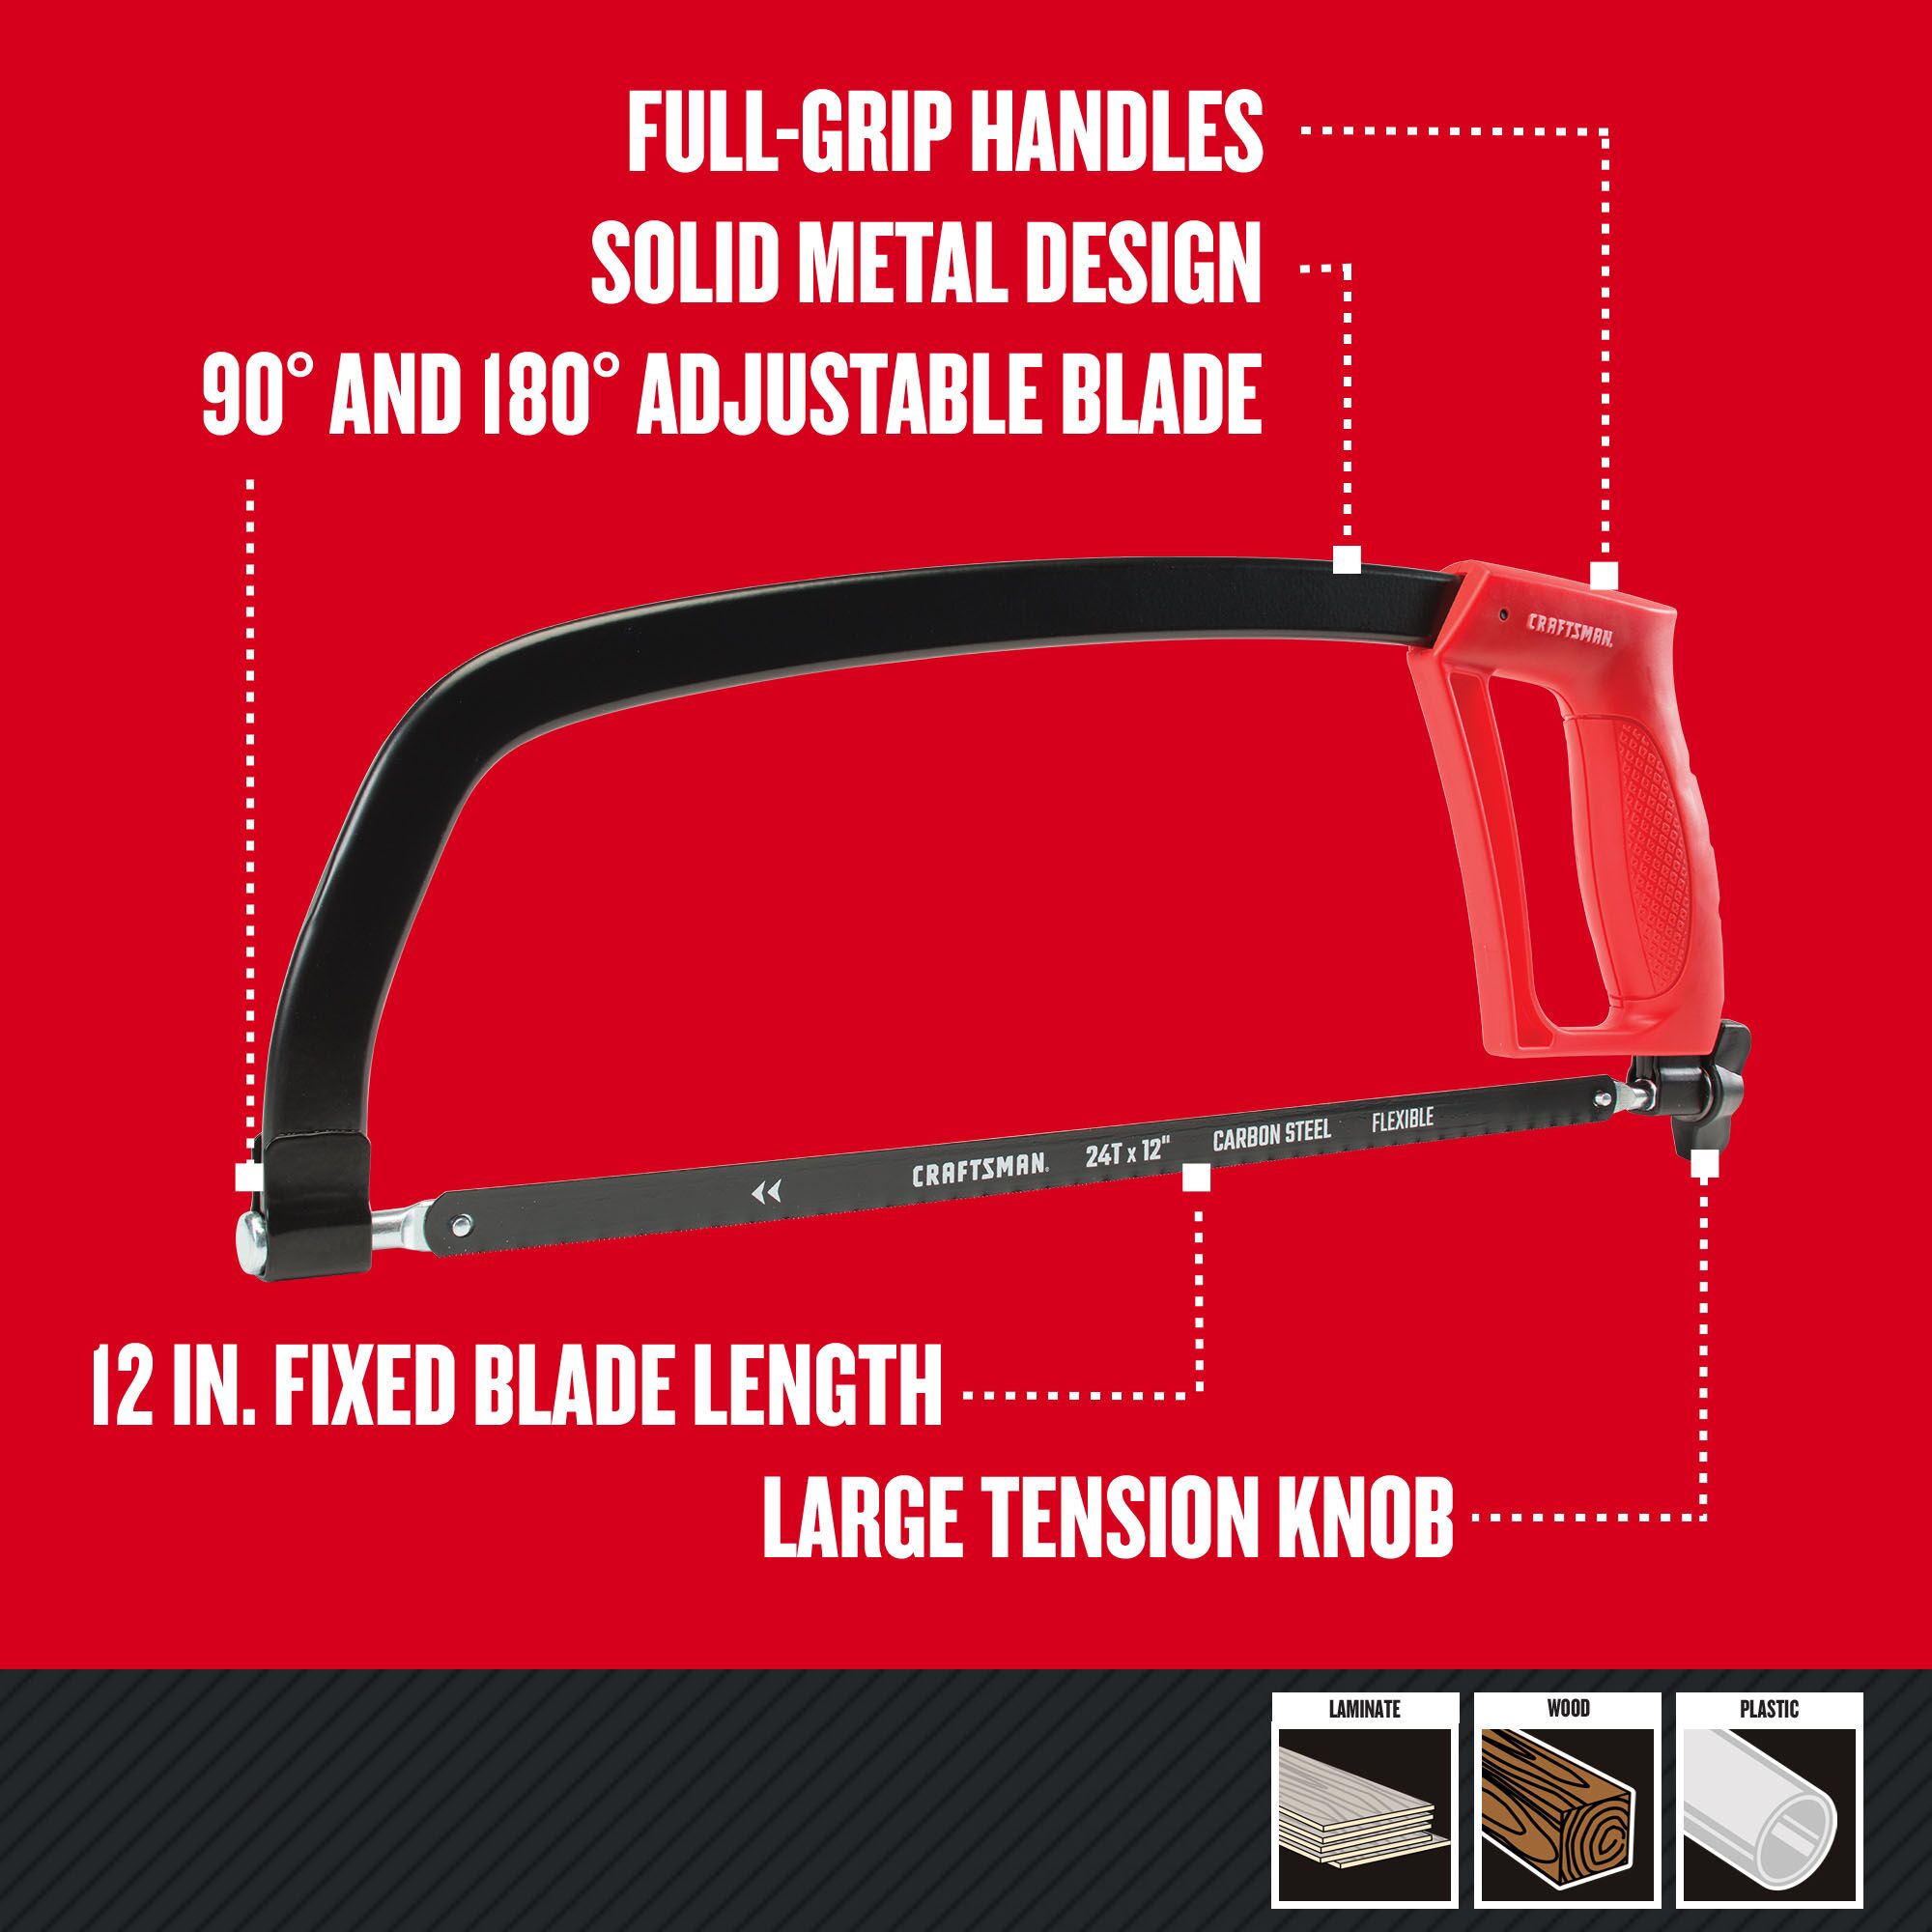 Graphic of CRAFTSMAN Hacksaw highlighting product features